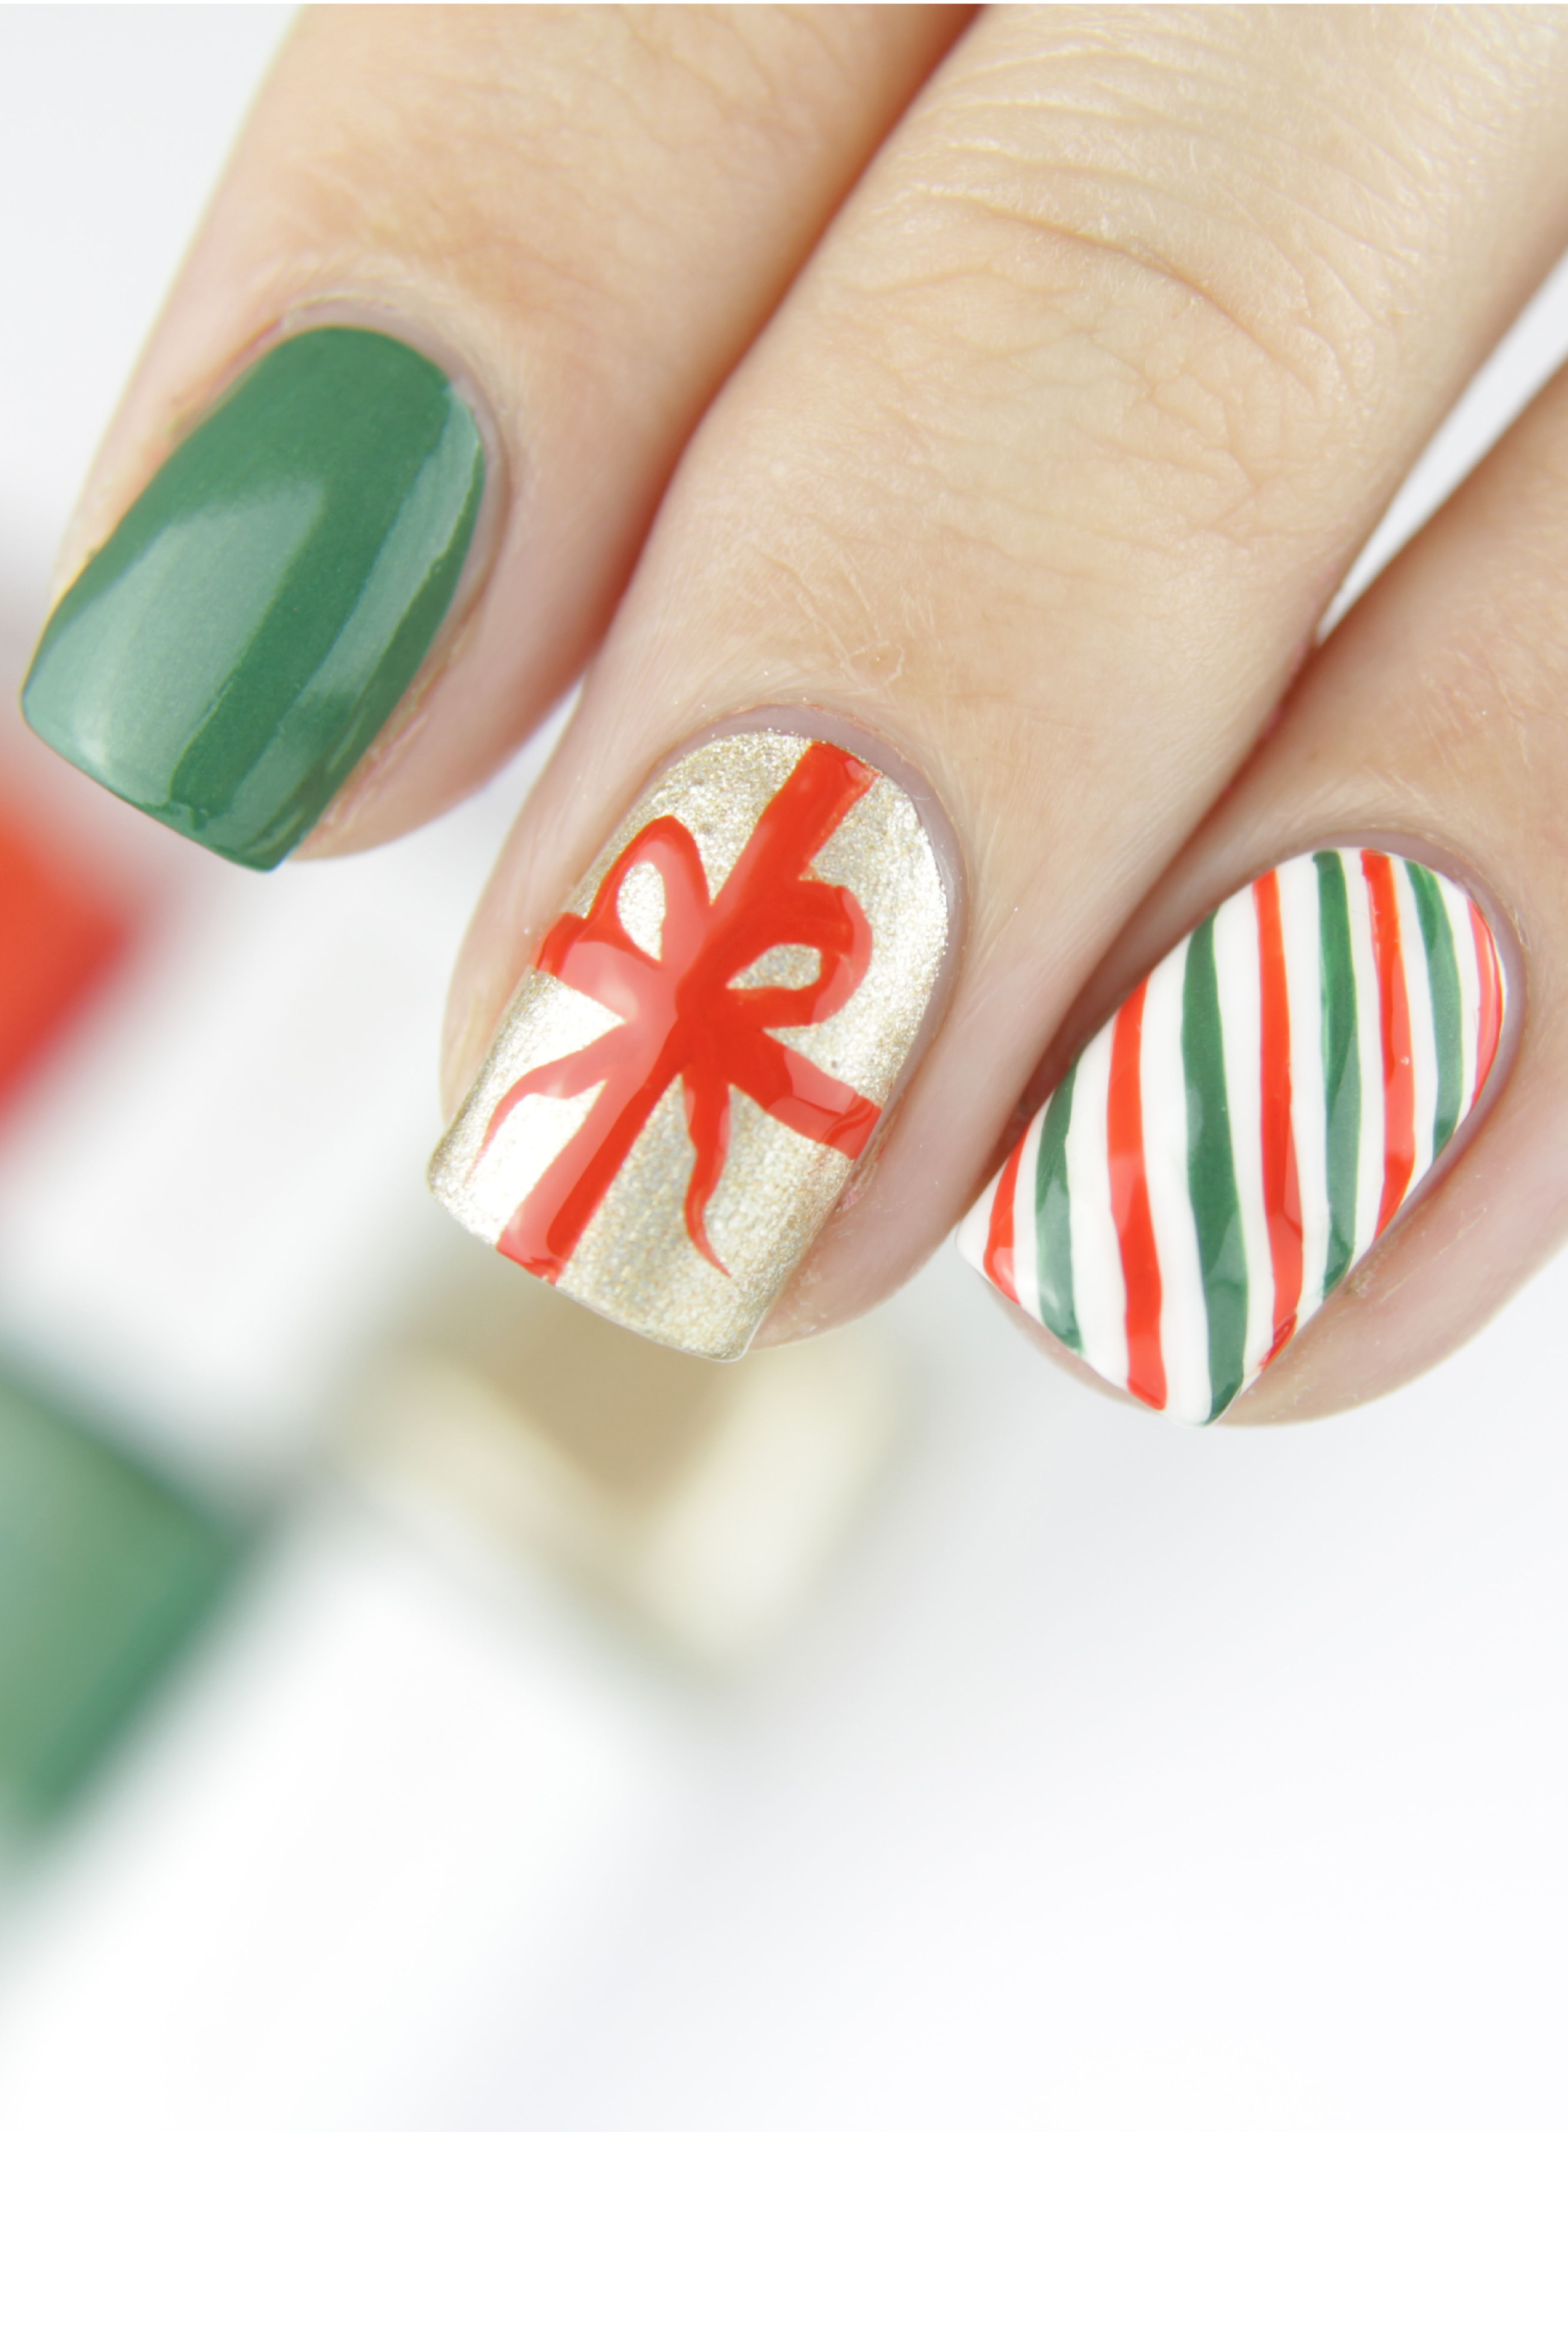 22 Best Christmas Nail Art Design Ideas 2018 - Easy Holiday Nails